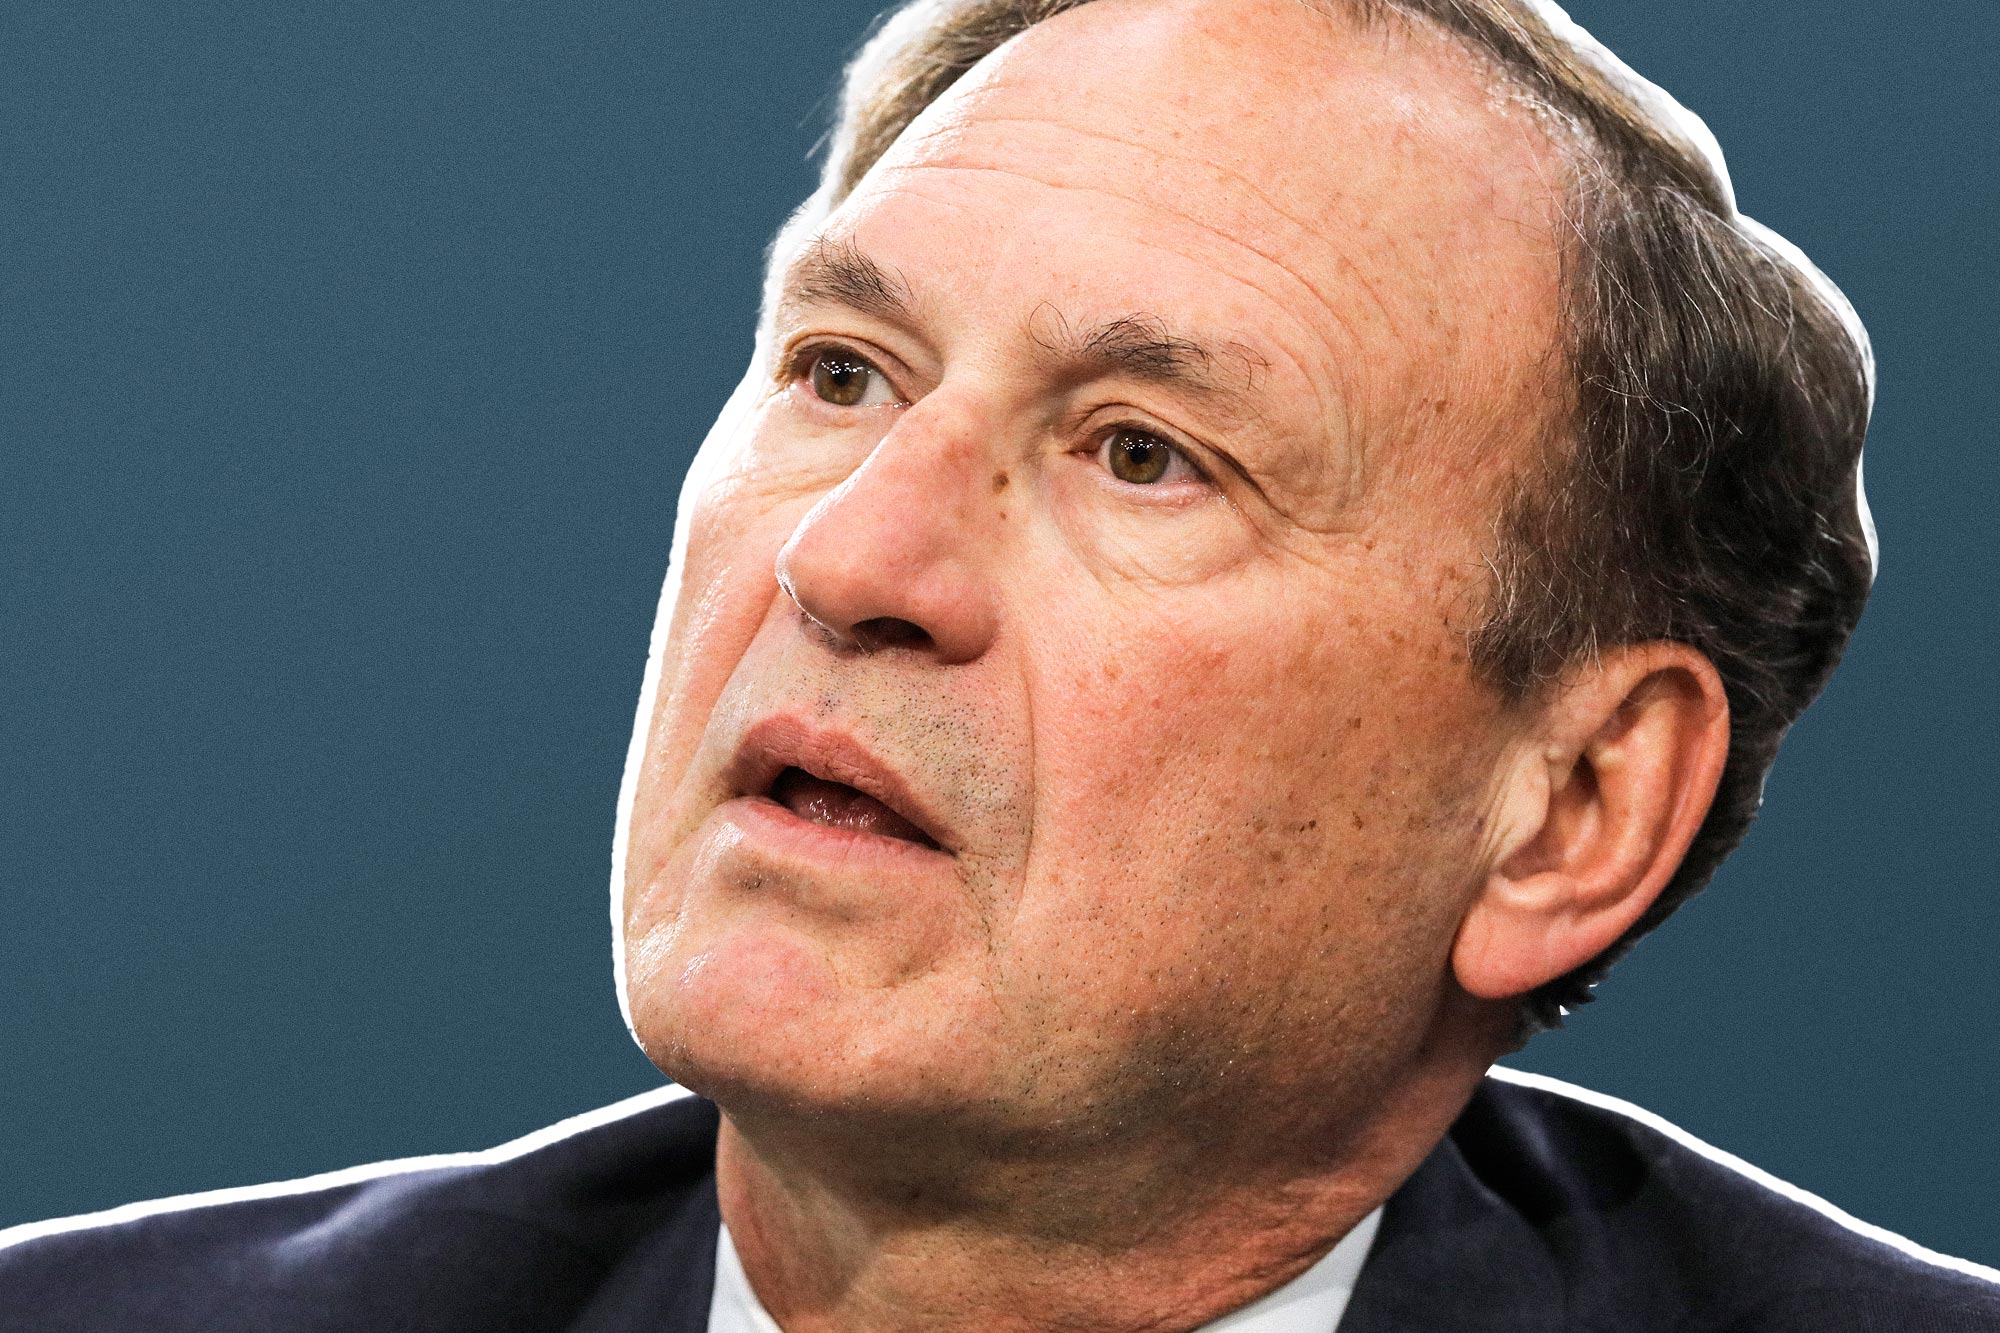 Samuel Alito in front of blue background